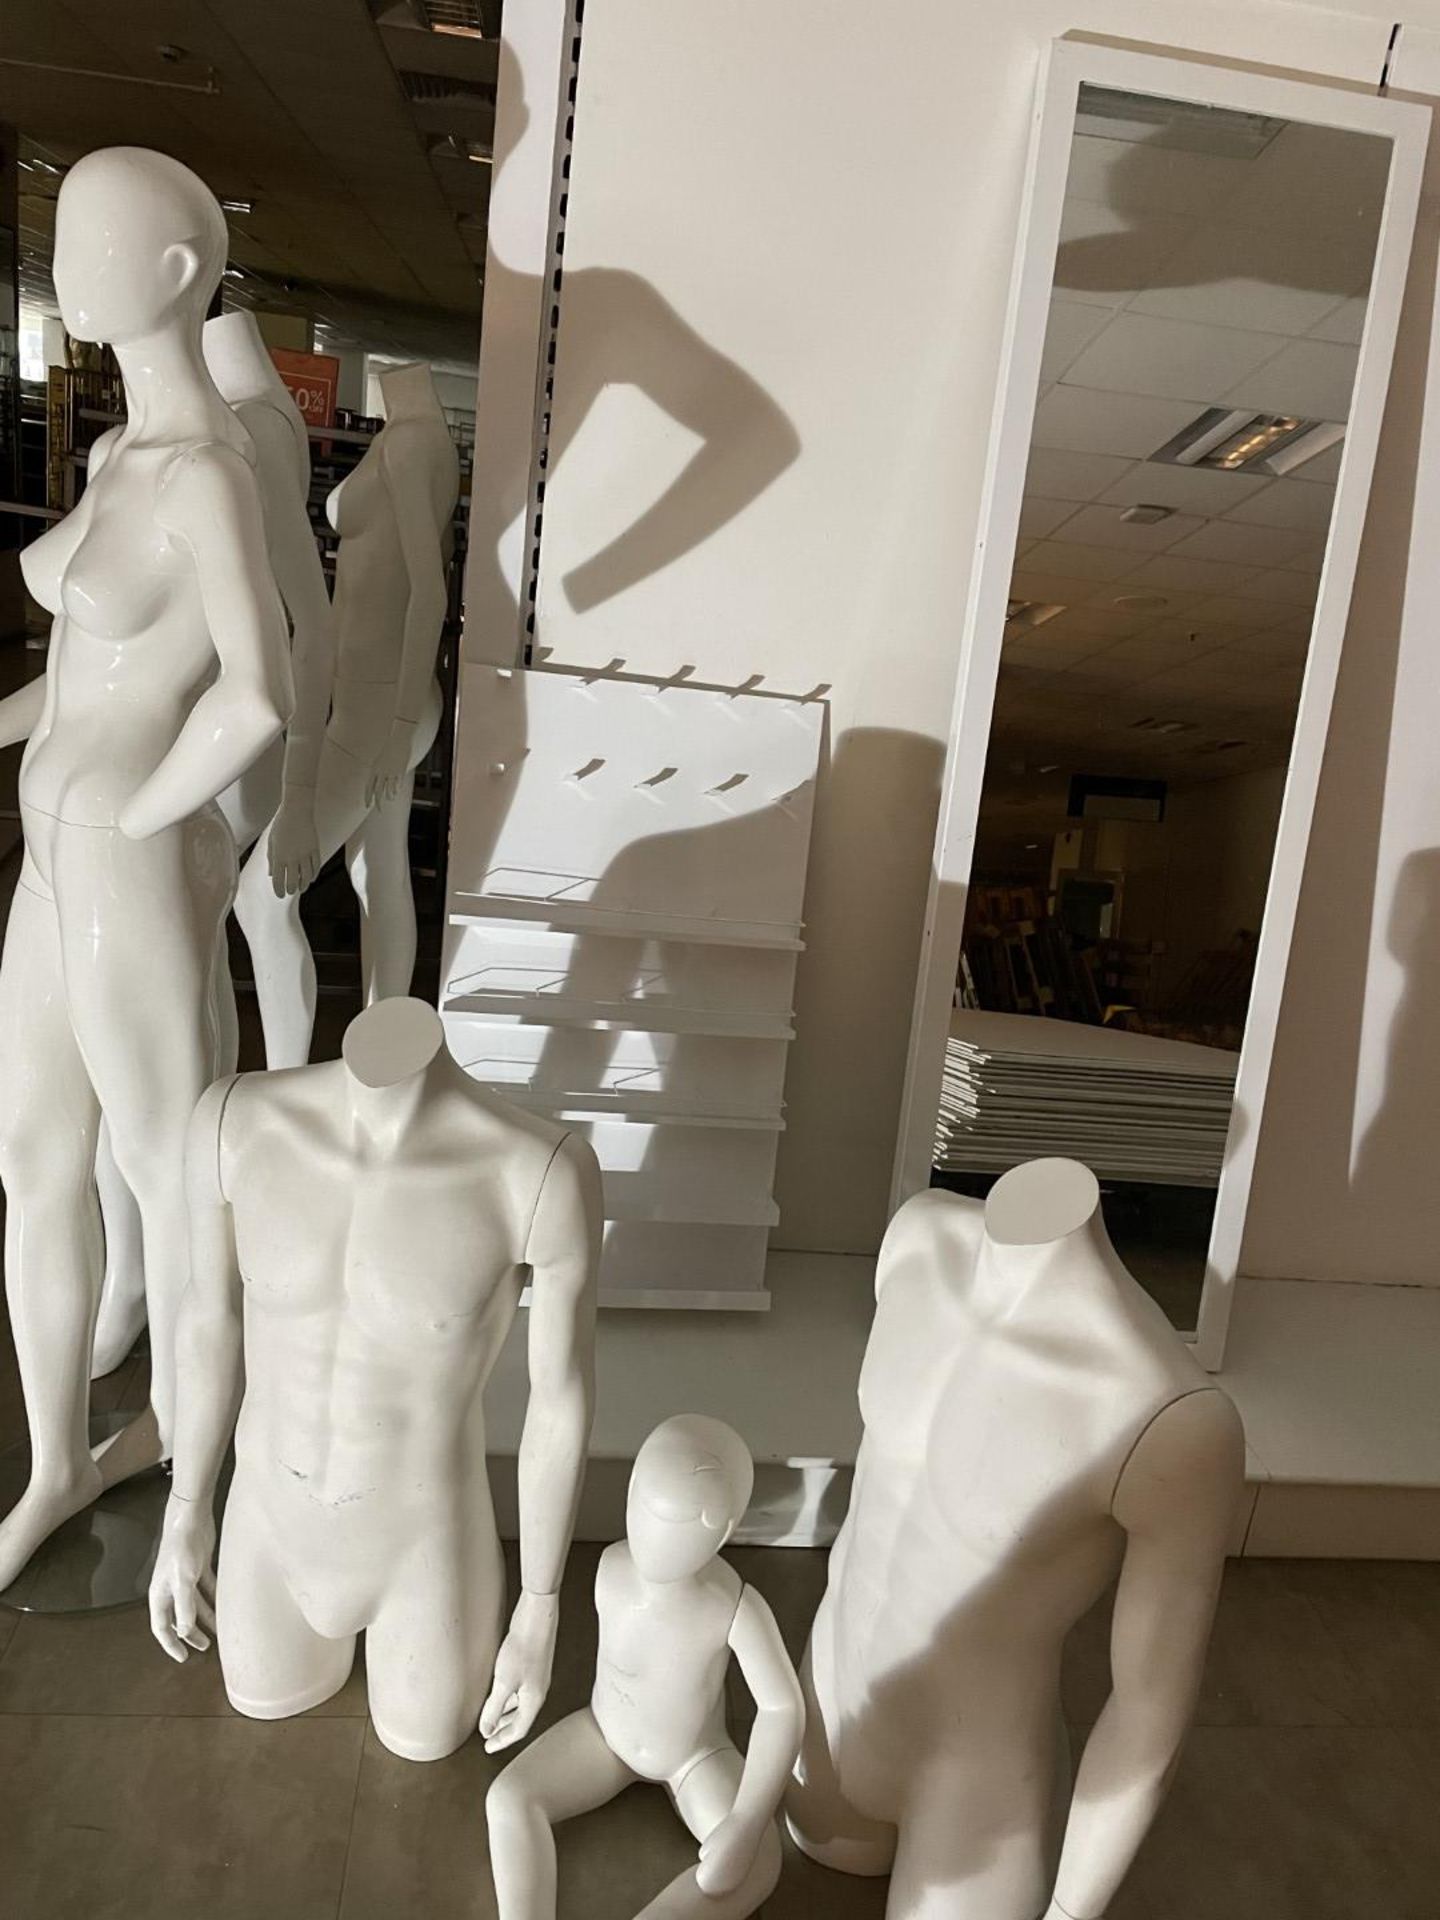 6 x Assorted Mannequins Plus Four 1 x Wall Mirror and 1 x Wall Display - Includes Complete and - Image 7 of 7